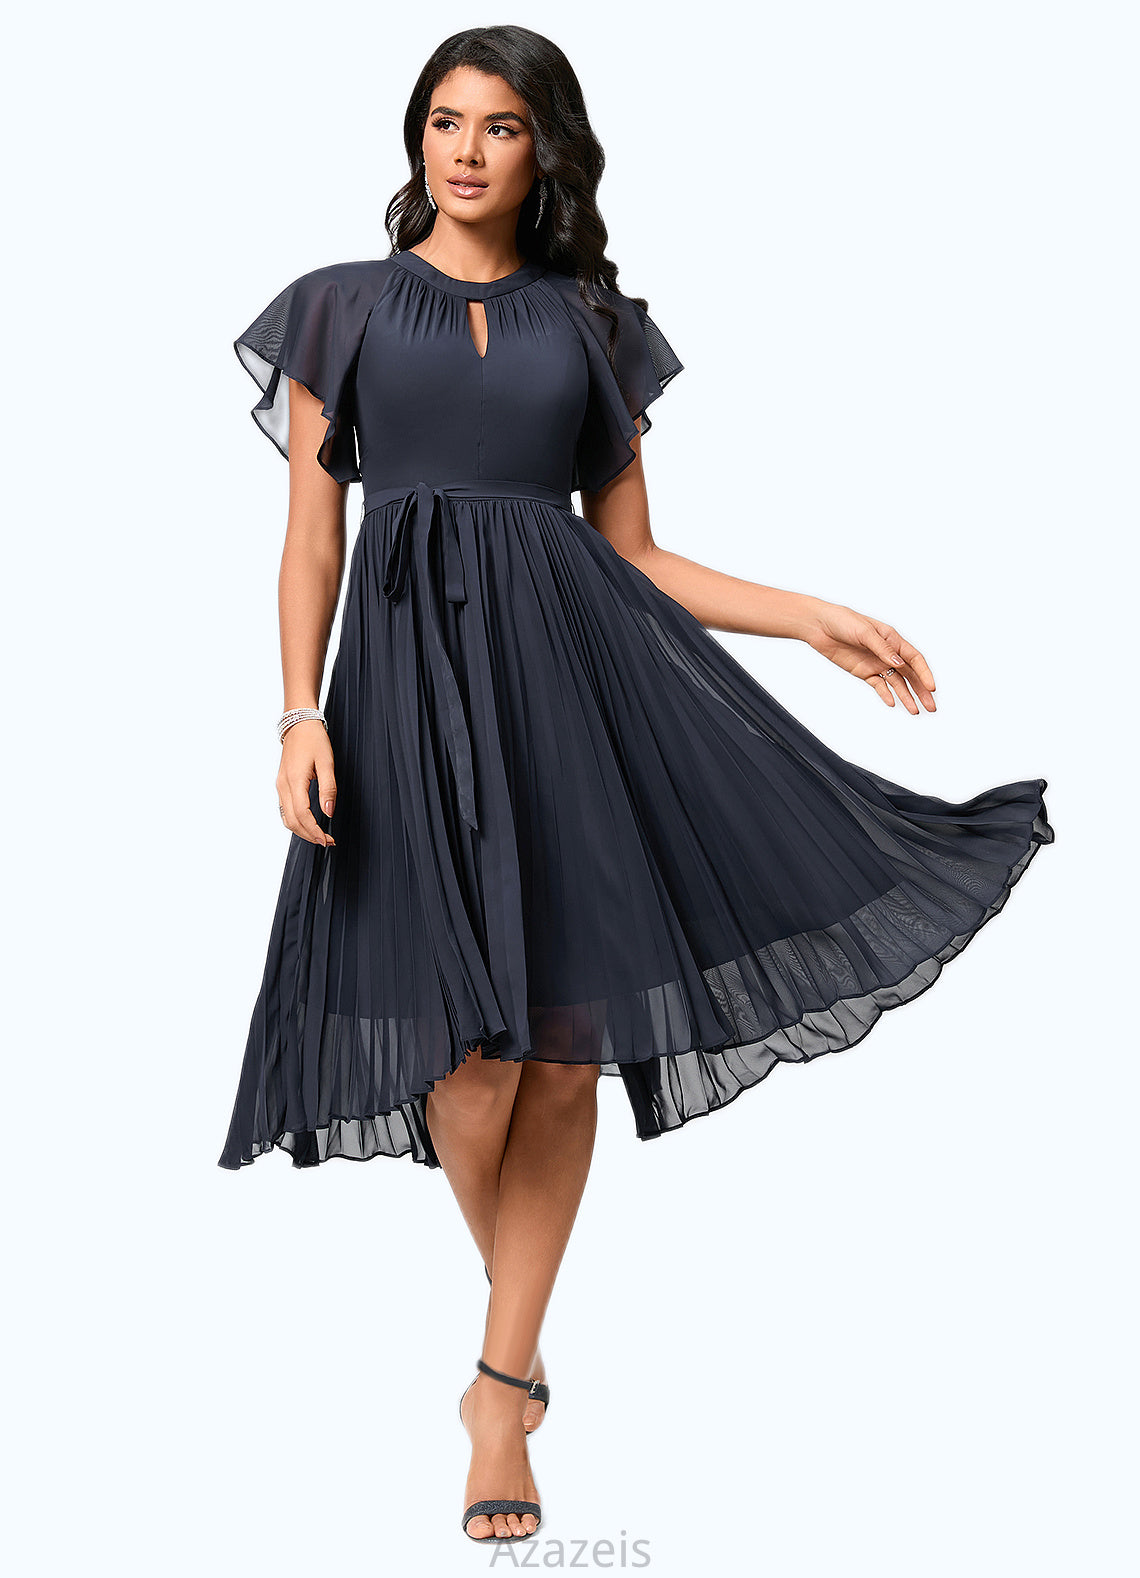 Averie A-line Scoop Asymmetrical Chiffon Cocktail Dress With Bow Pleated DFP0022530